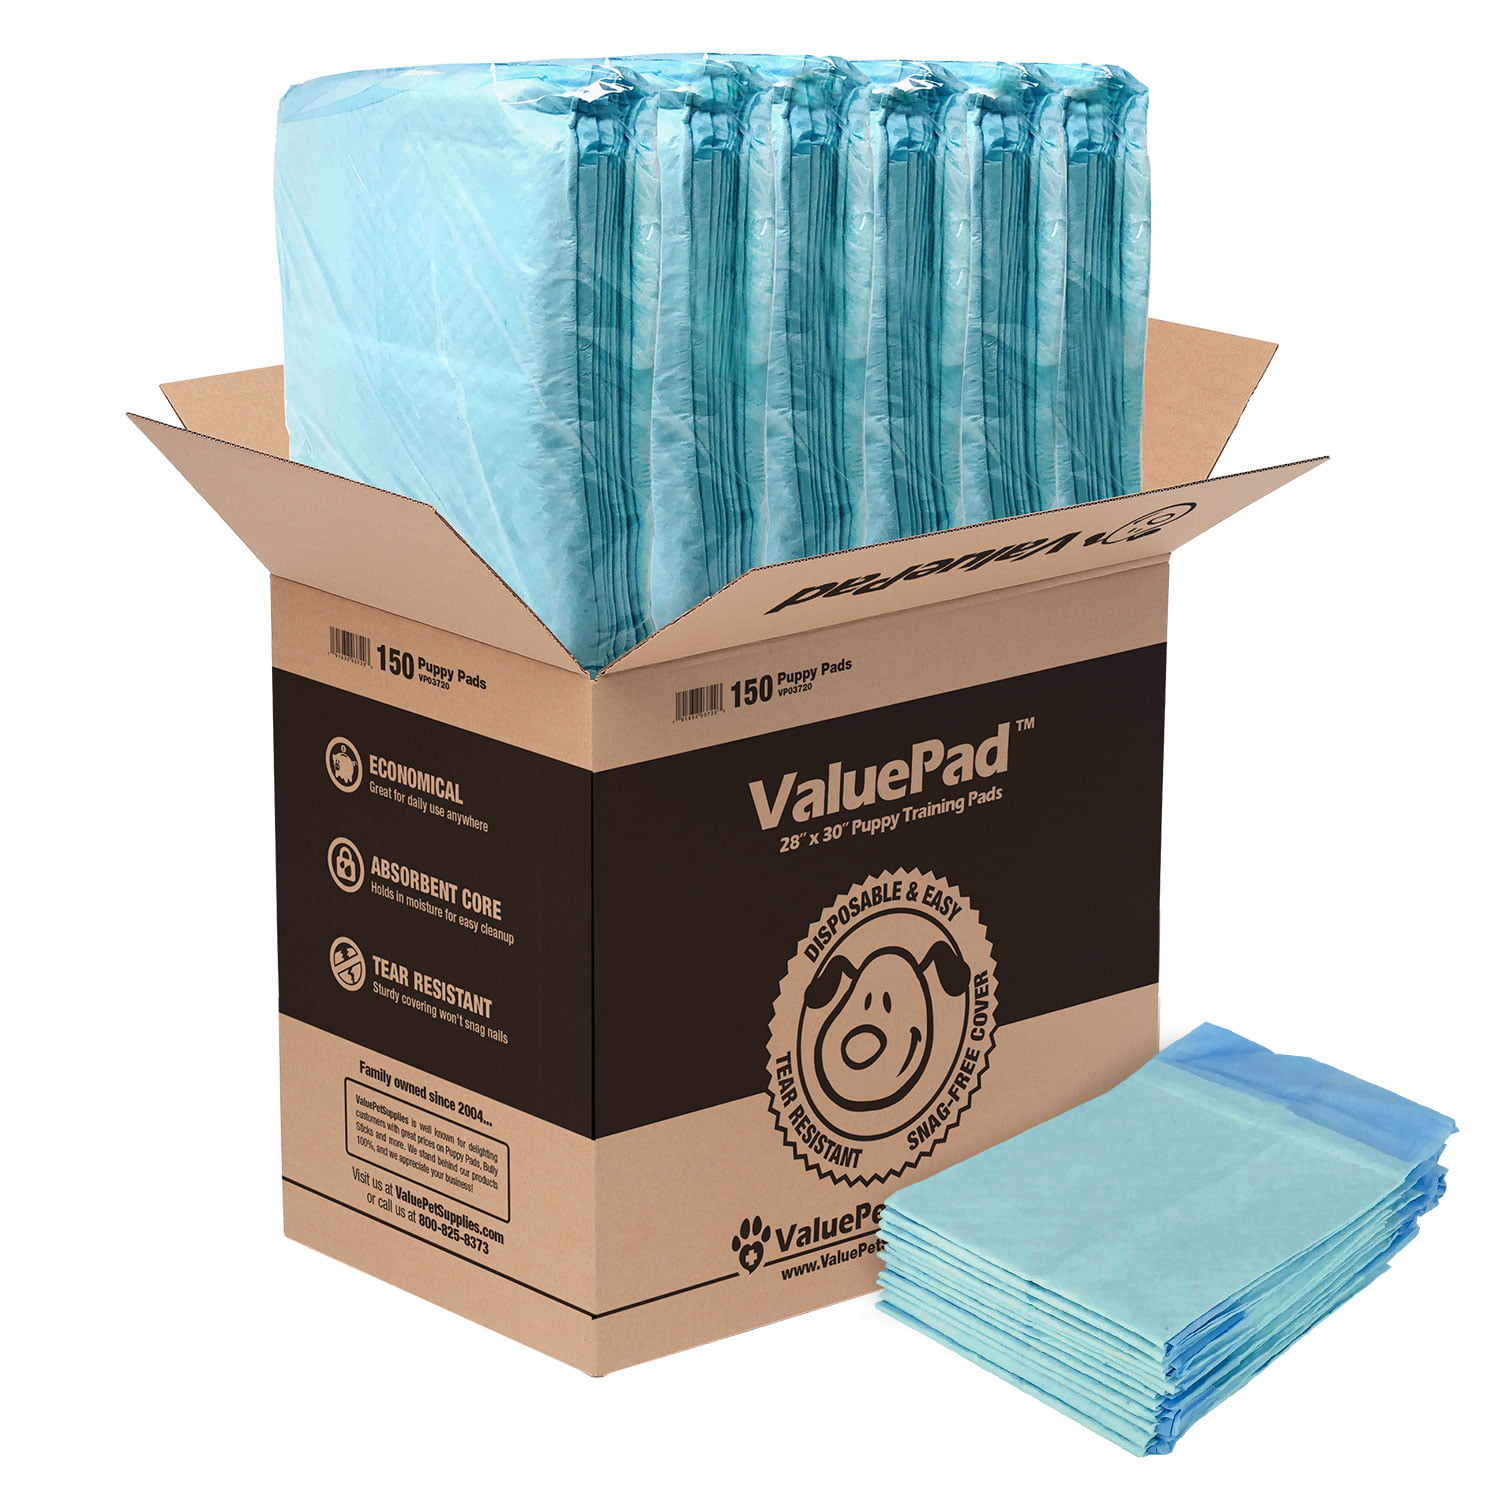 ValuePad Puppy Pads, Large 28x30 Inch, 150 Count - Economy ...